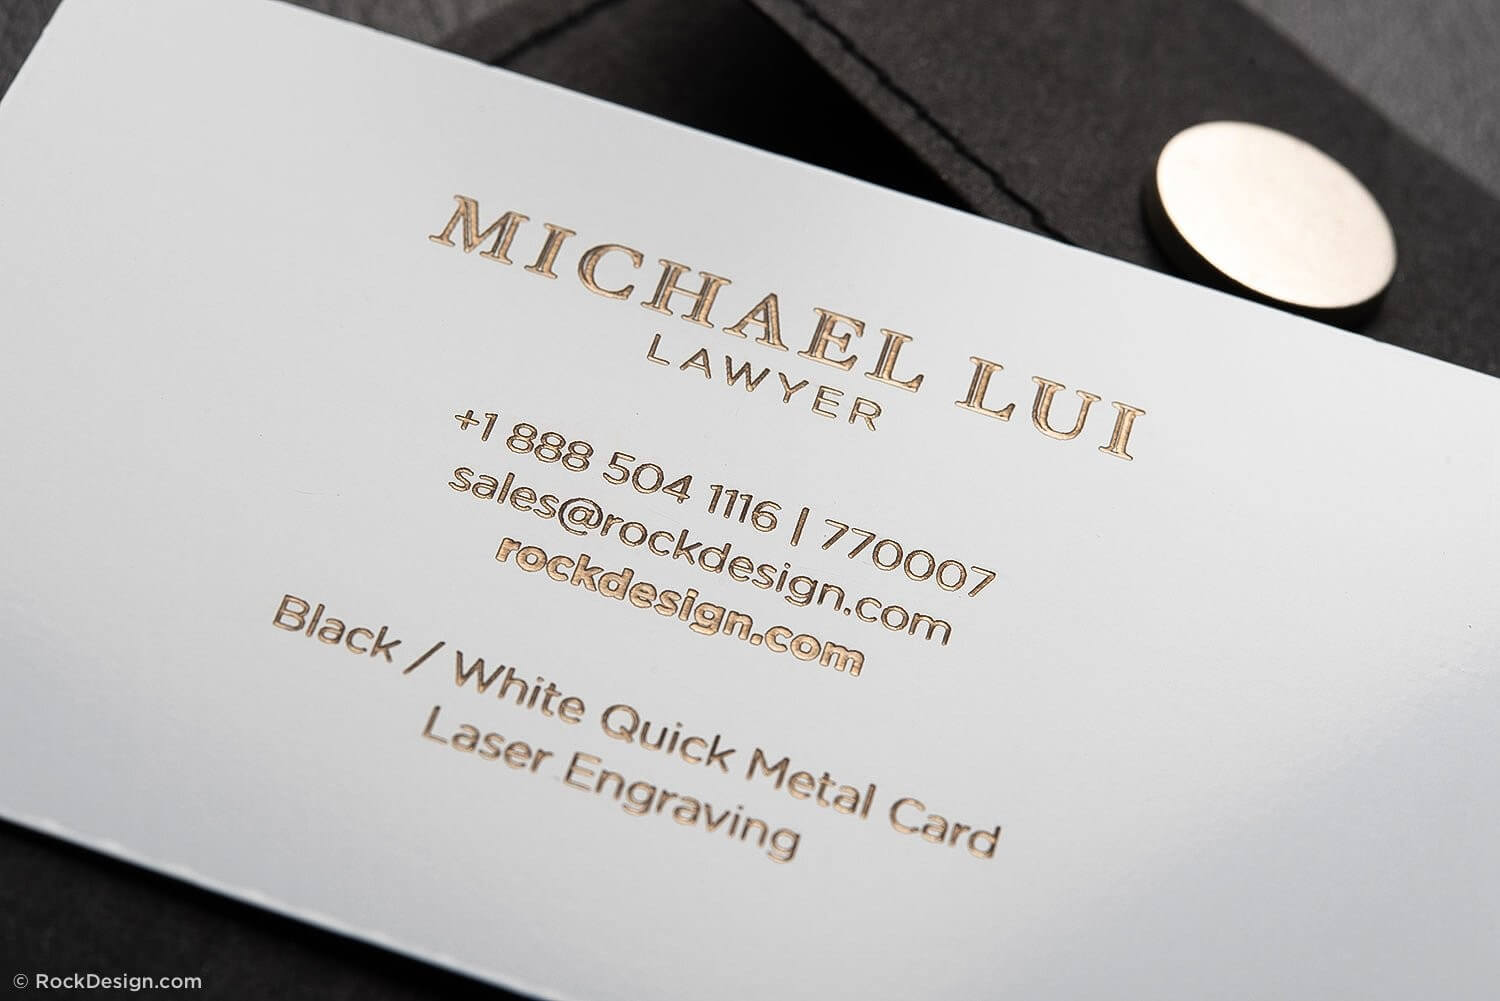 Lawyer Business Cards Templates | Creative Atoms For Lawyer Business Cards Templates